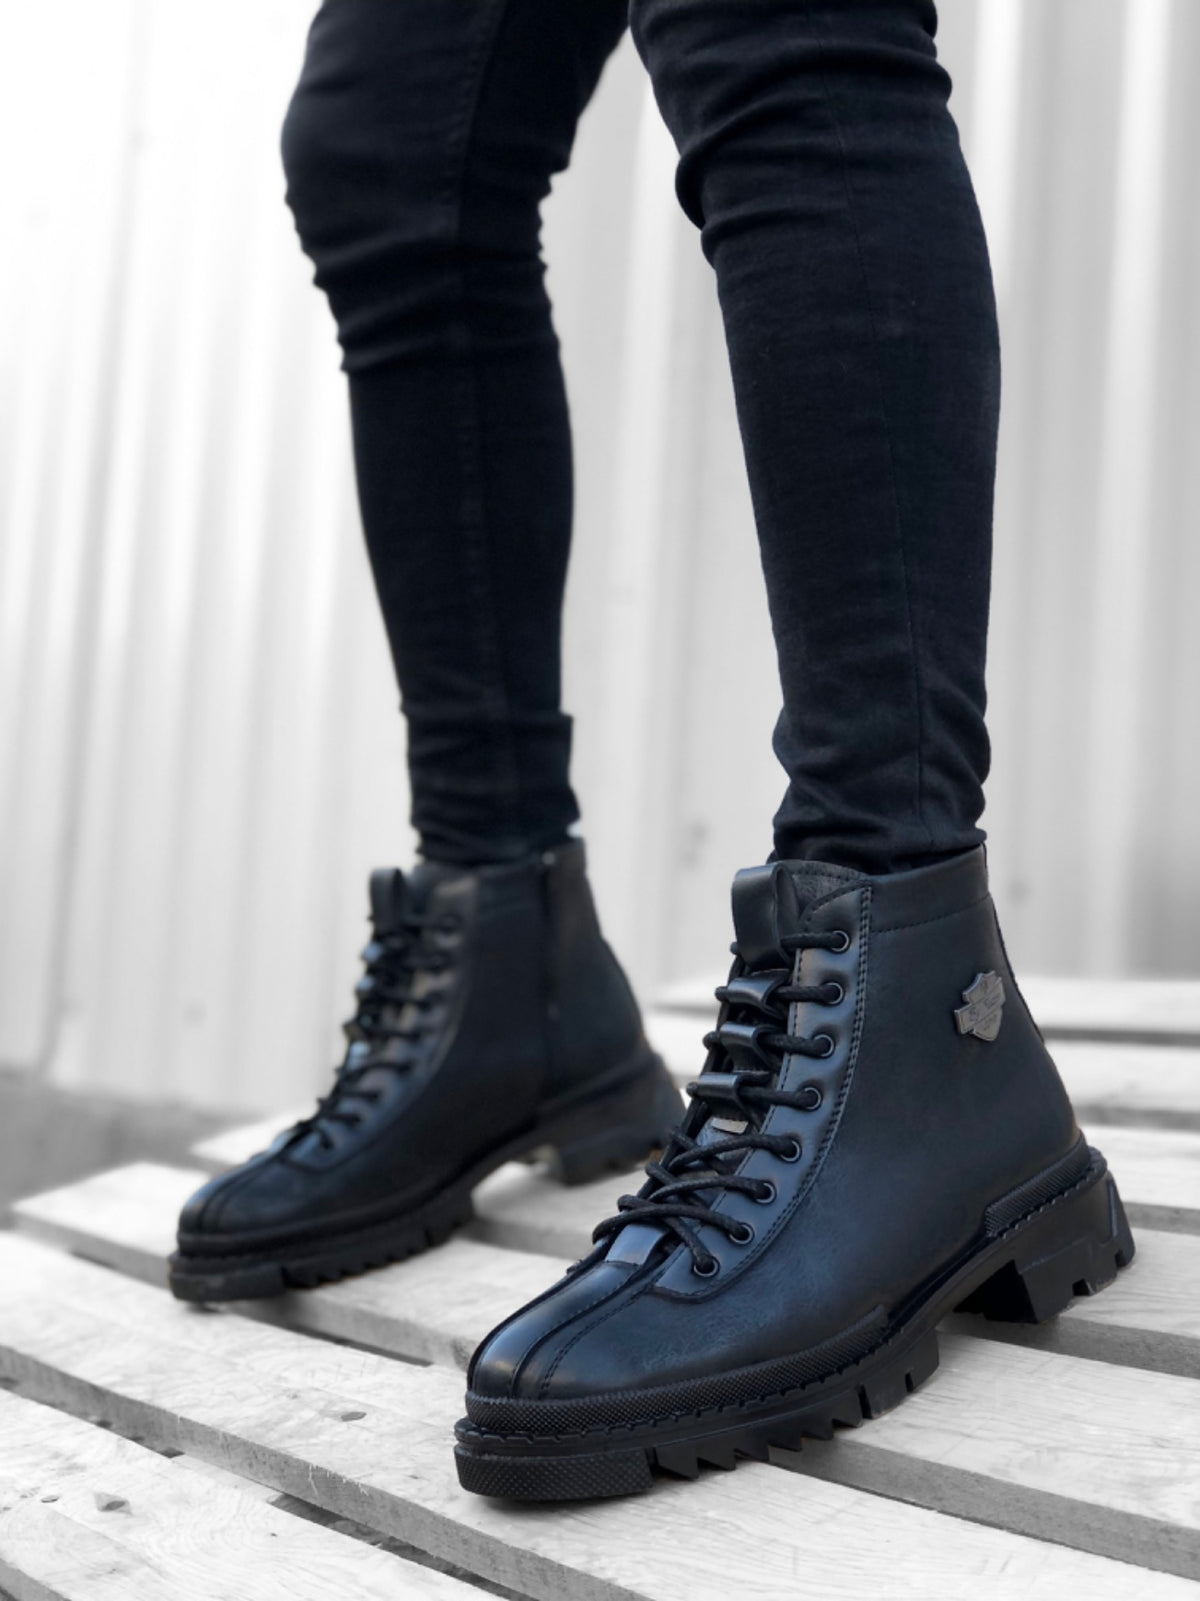 BA0217 Patterned Lace-up Zippered Buckle Black Men's Classic Sports Classic Ankle Ankle Boots - STREETMODE ™